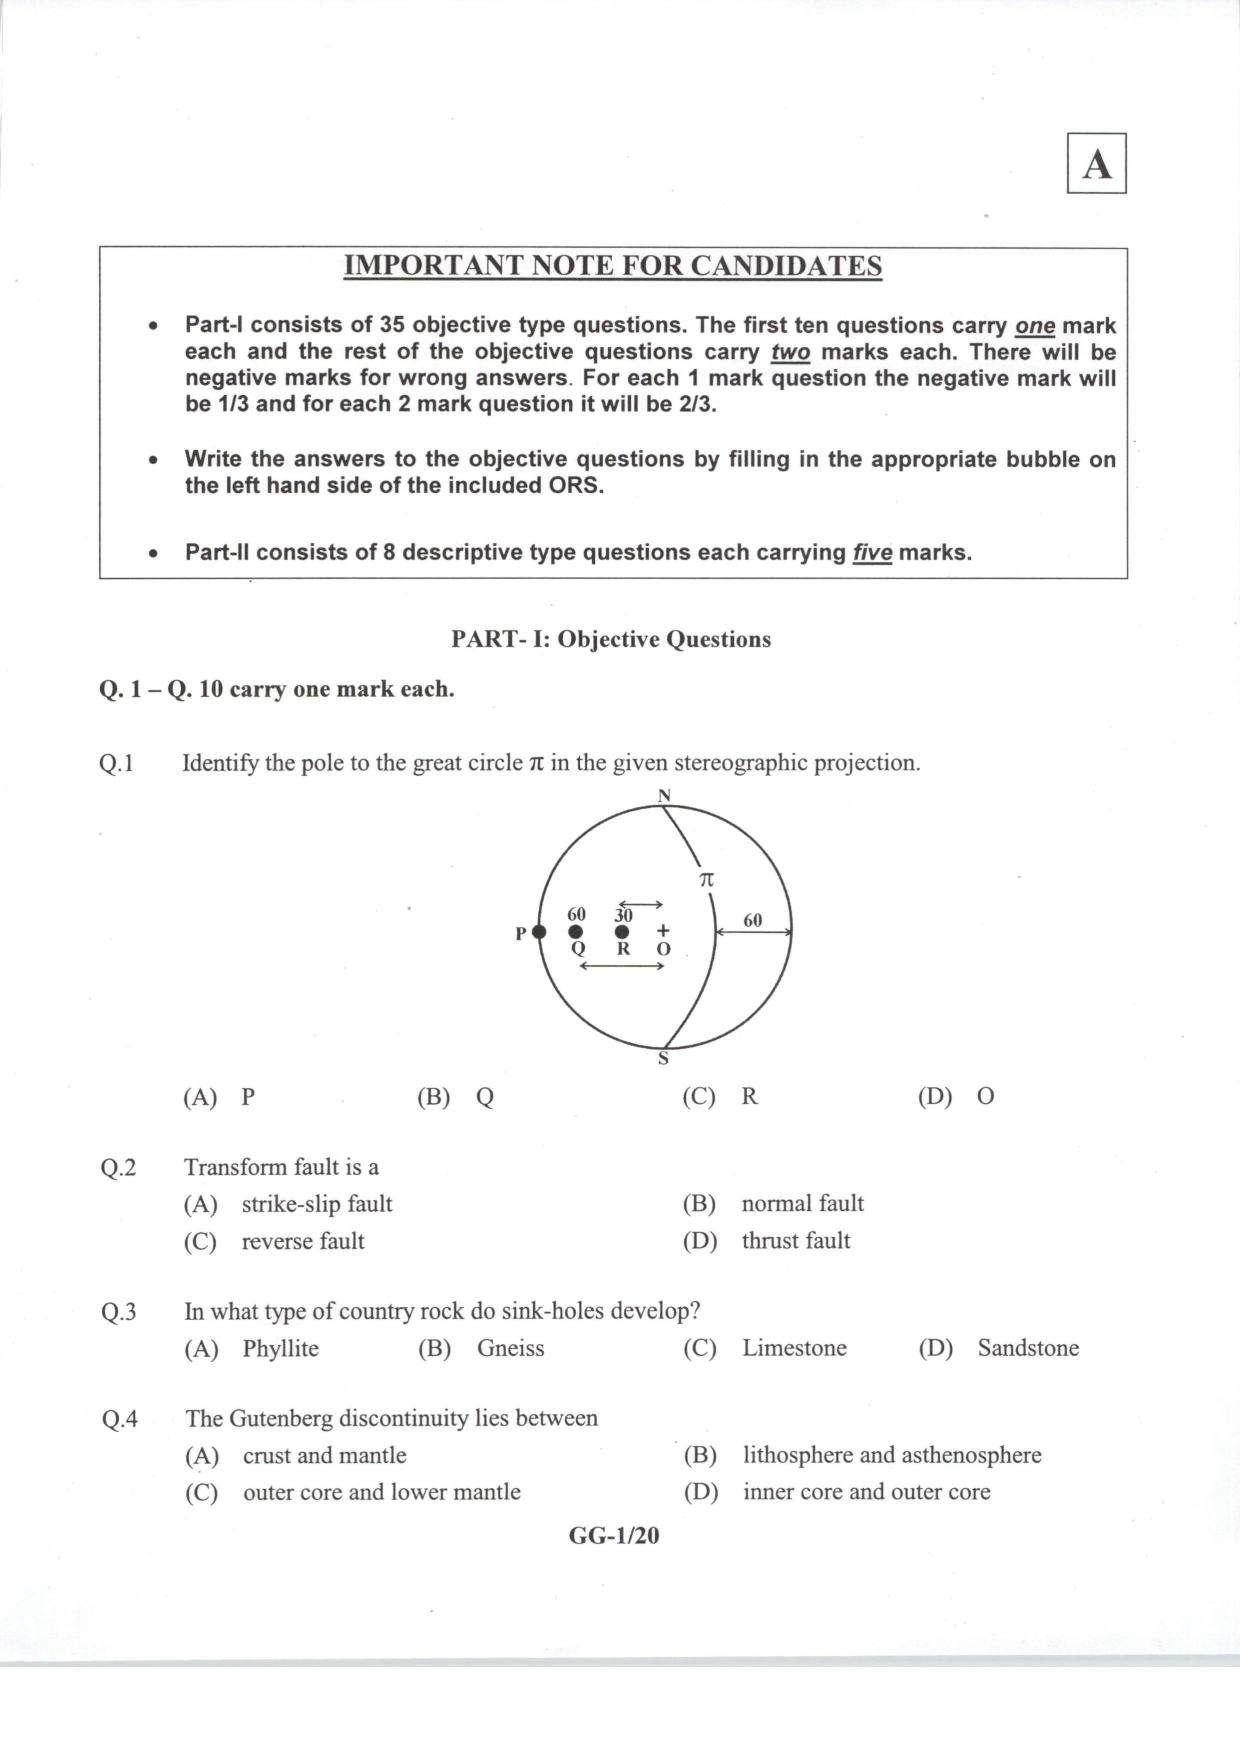 JAM 2014: GG Question Paper - Page 3